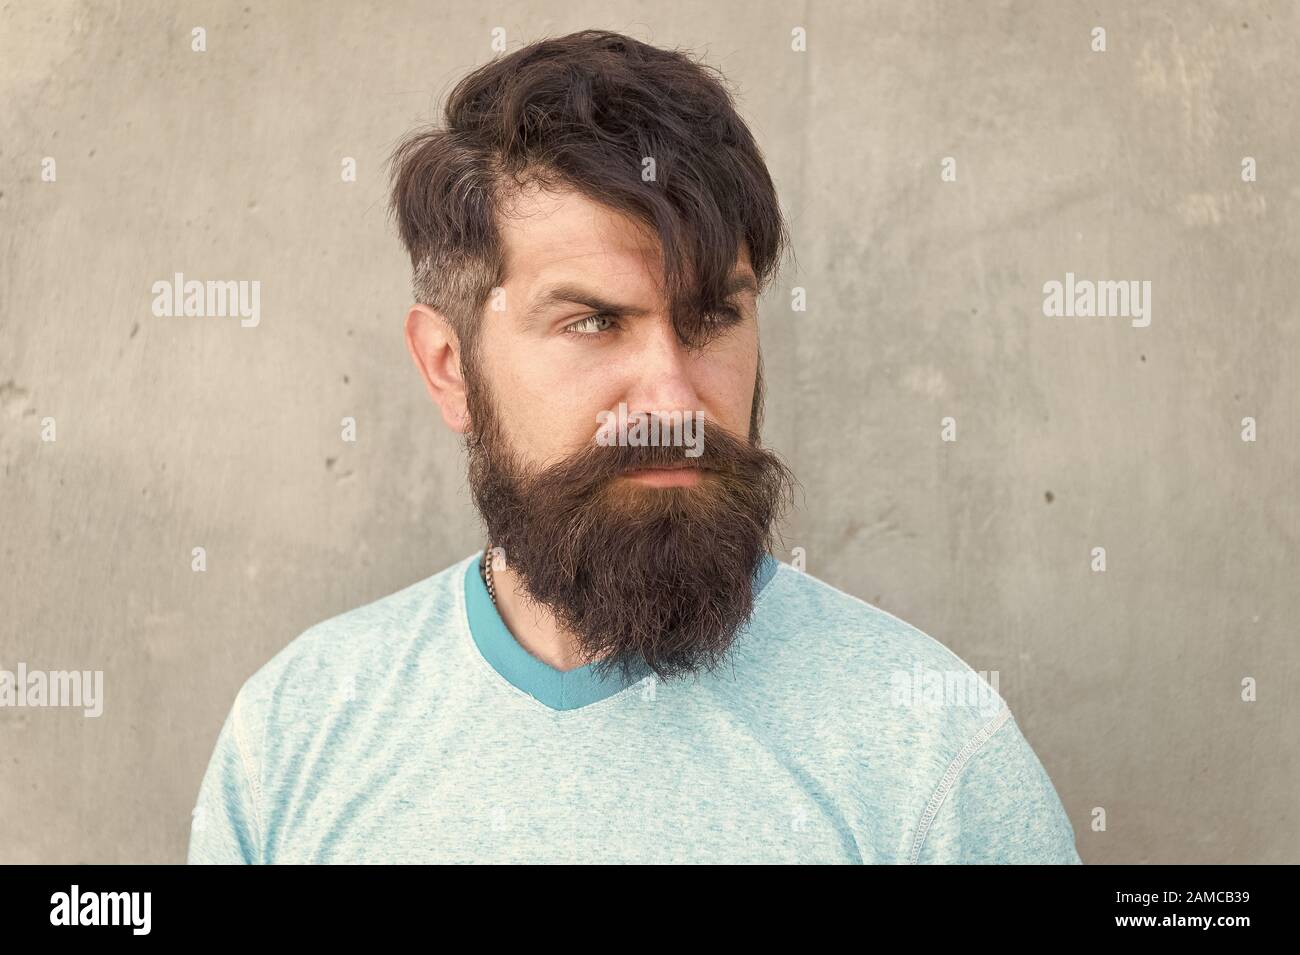 Hipster lifestyle. Brutal handsome mature hipster man. Bearded man trendy  style. Beard and mustache grooming. Long hair. Cut bangs. Cool hipster with  beard need haircut. Barber salon and facial care Stock Photo -